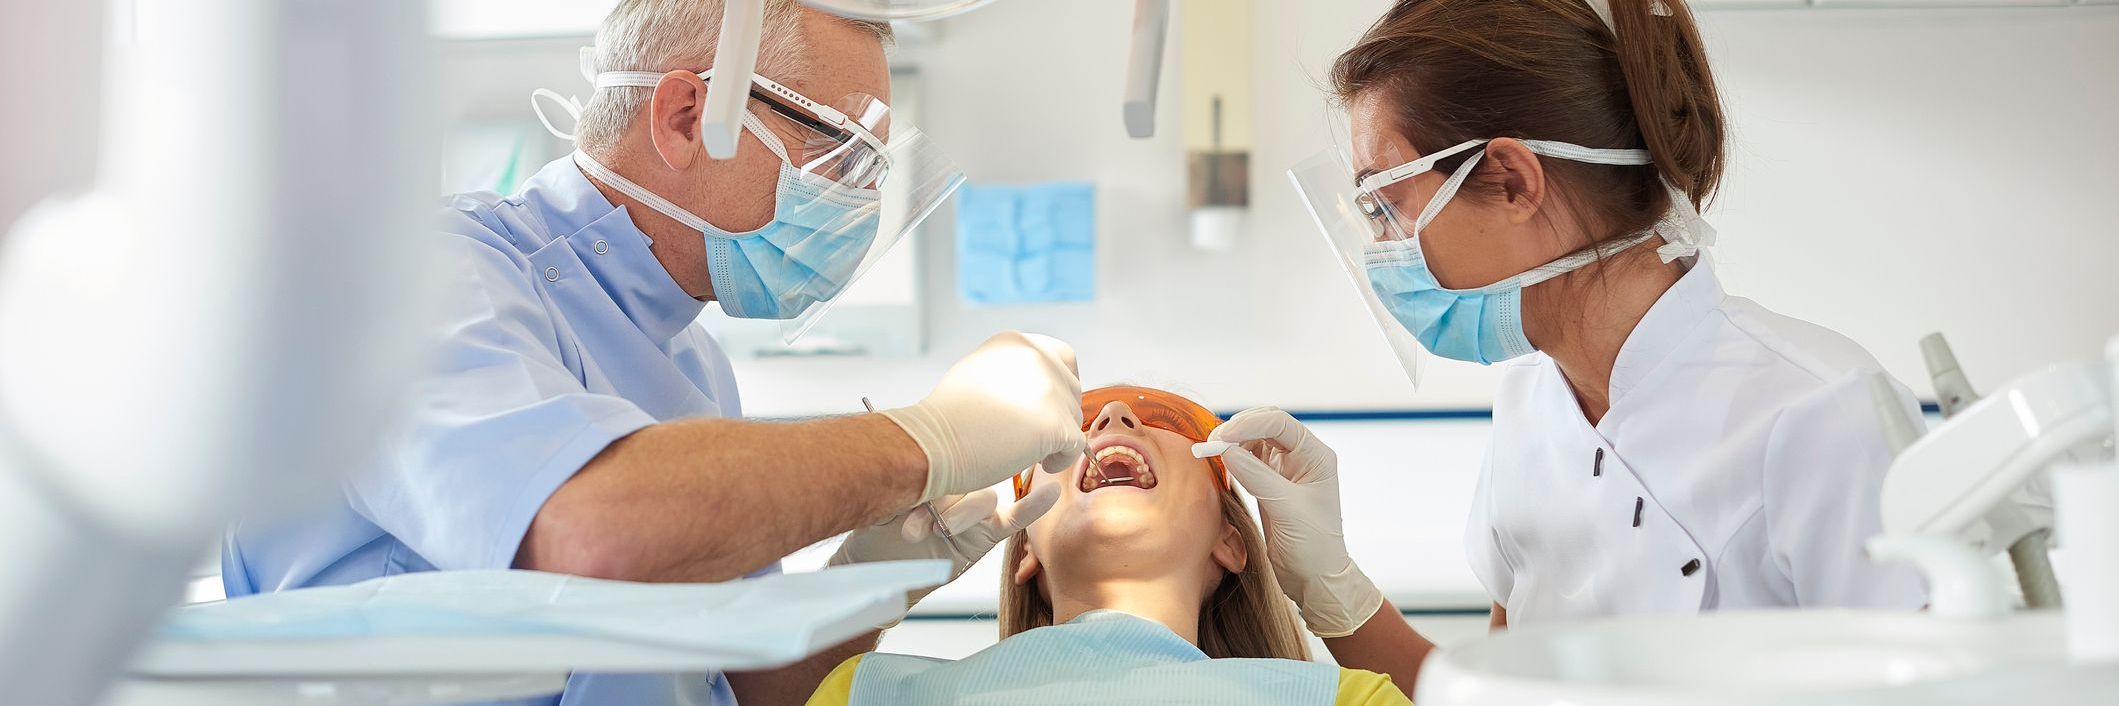 Advising Dentists - Key Issues for Professionals